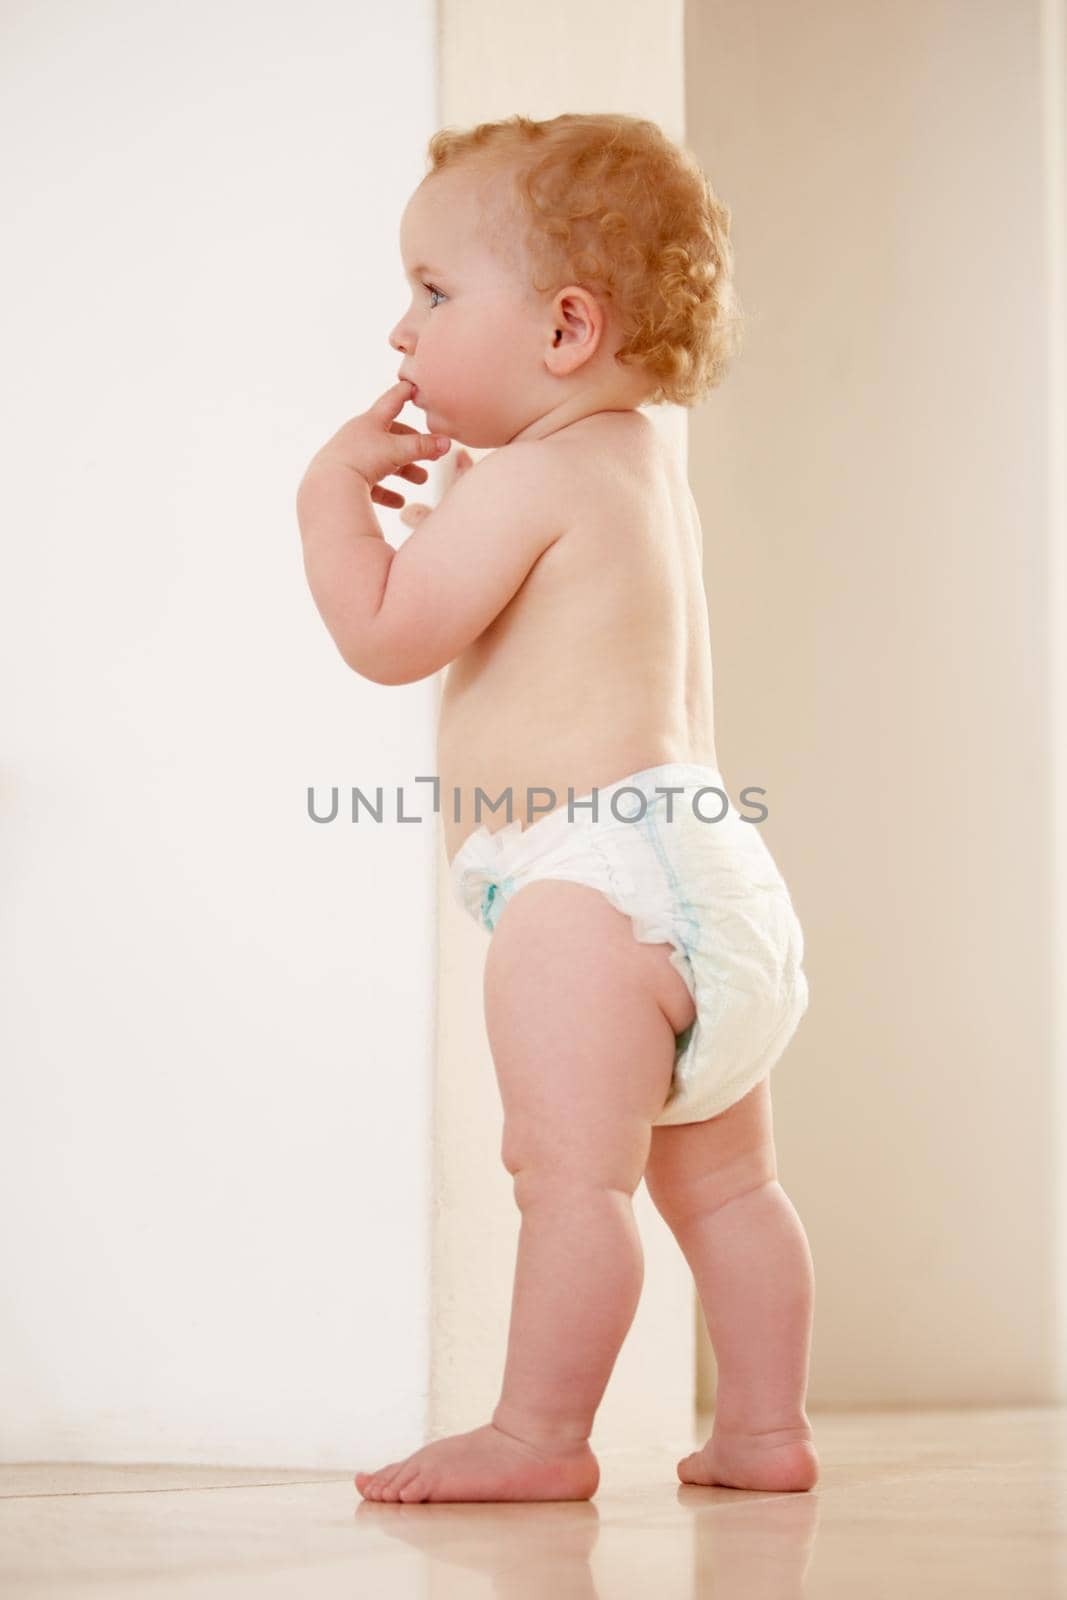 Adorable baby boy standing by himself and looking away.